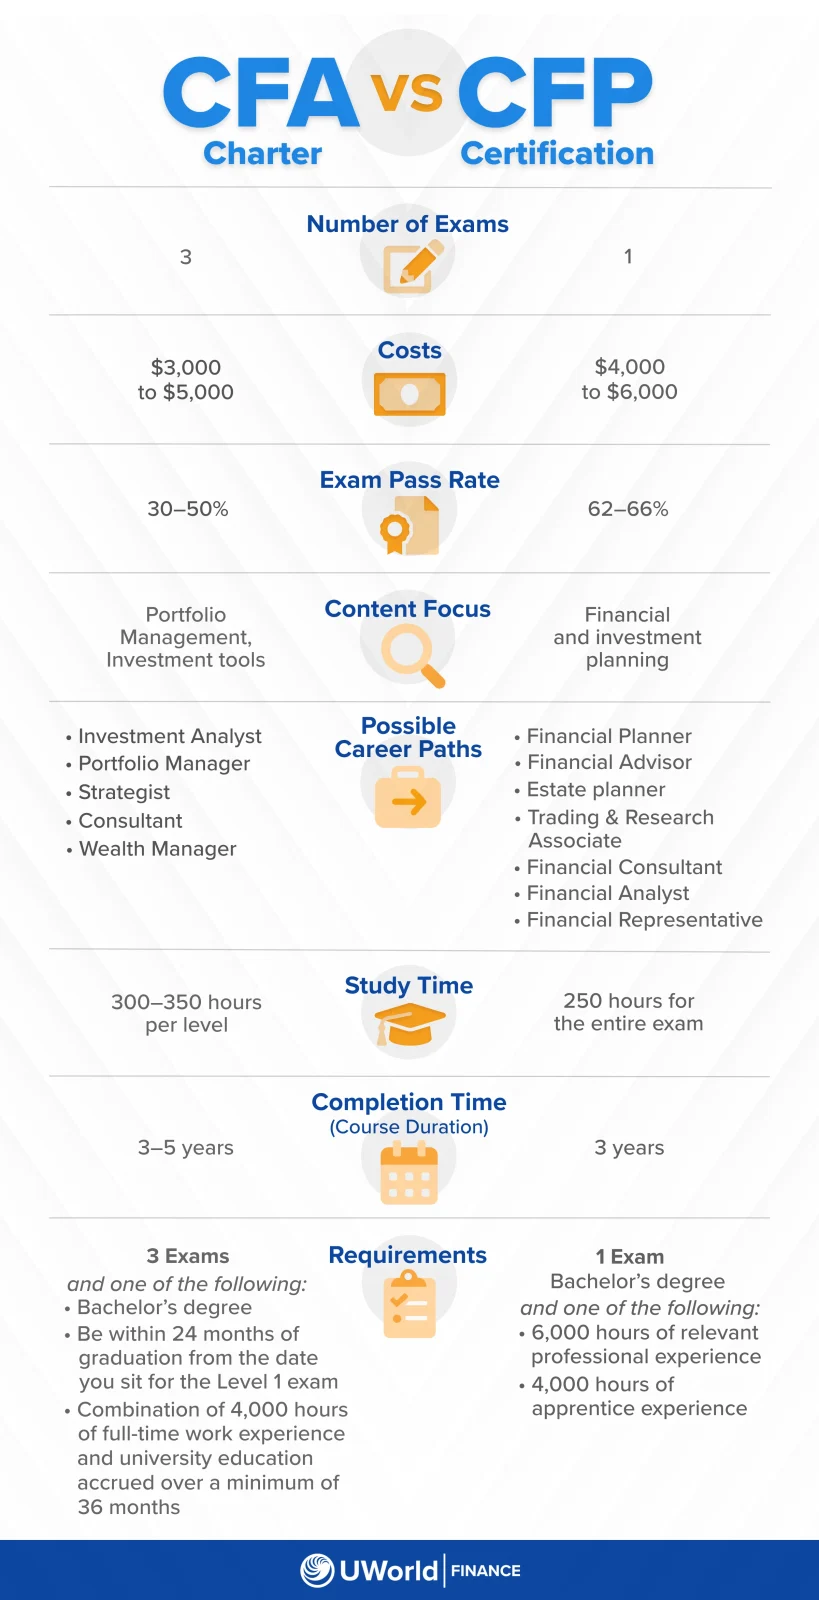 An infographic listing out the differences between the CFA charter and the CFP certification